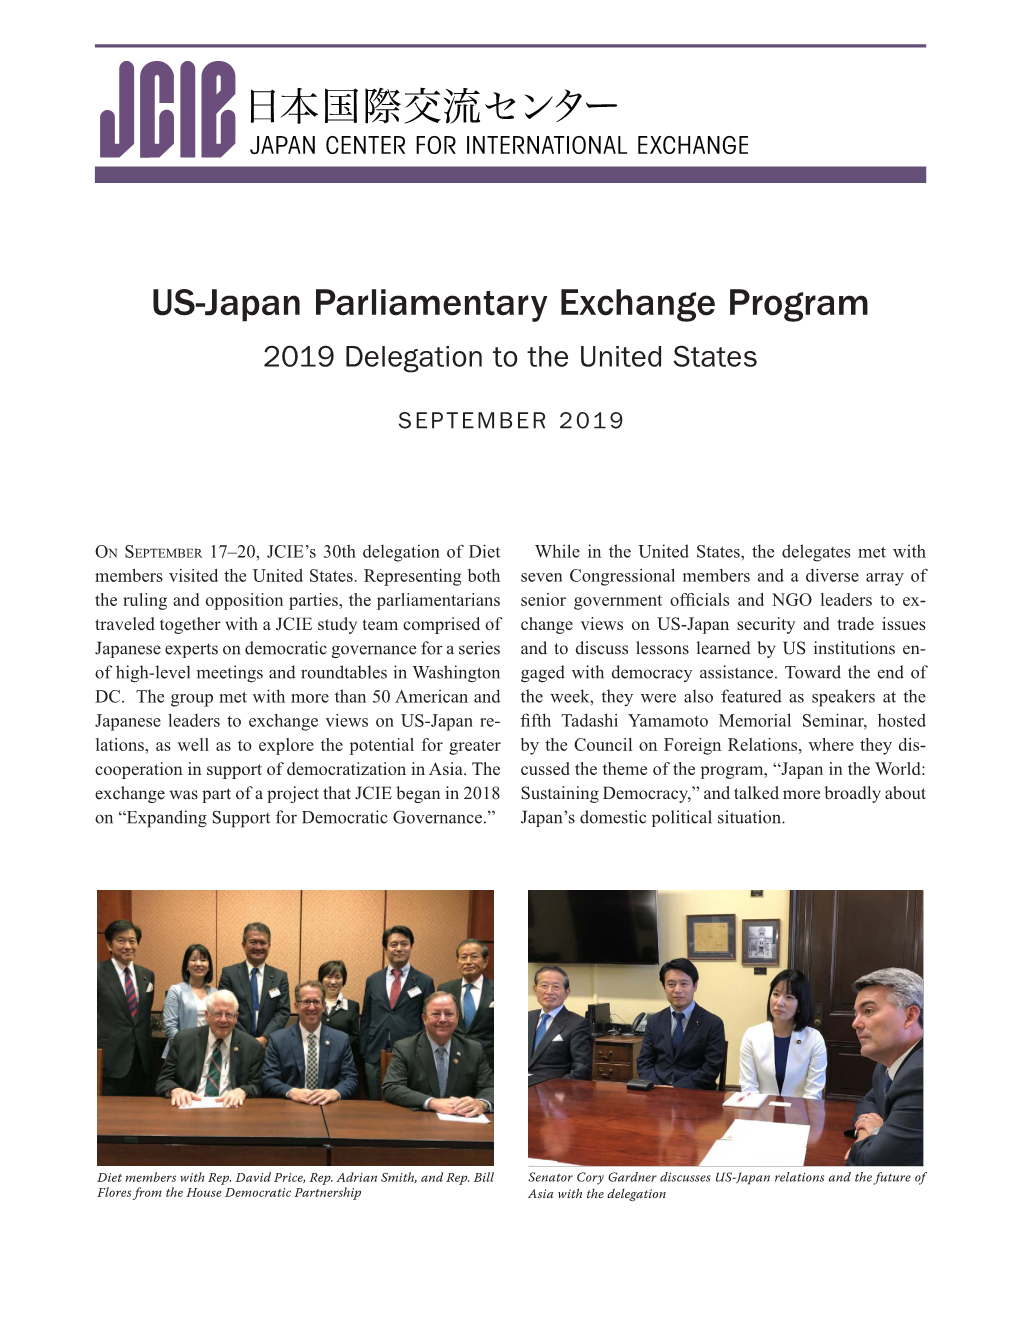 US-Japan Parliamentary Exchange Program 2019 Delegation to the United States